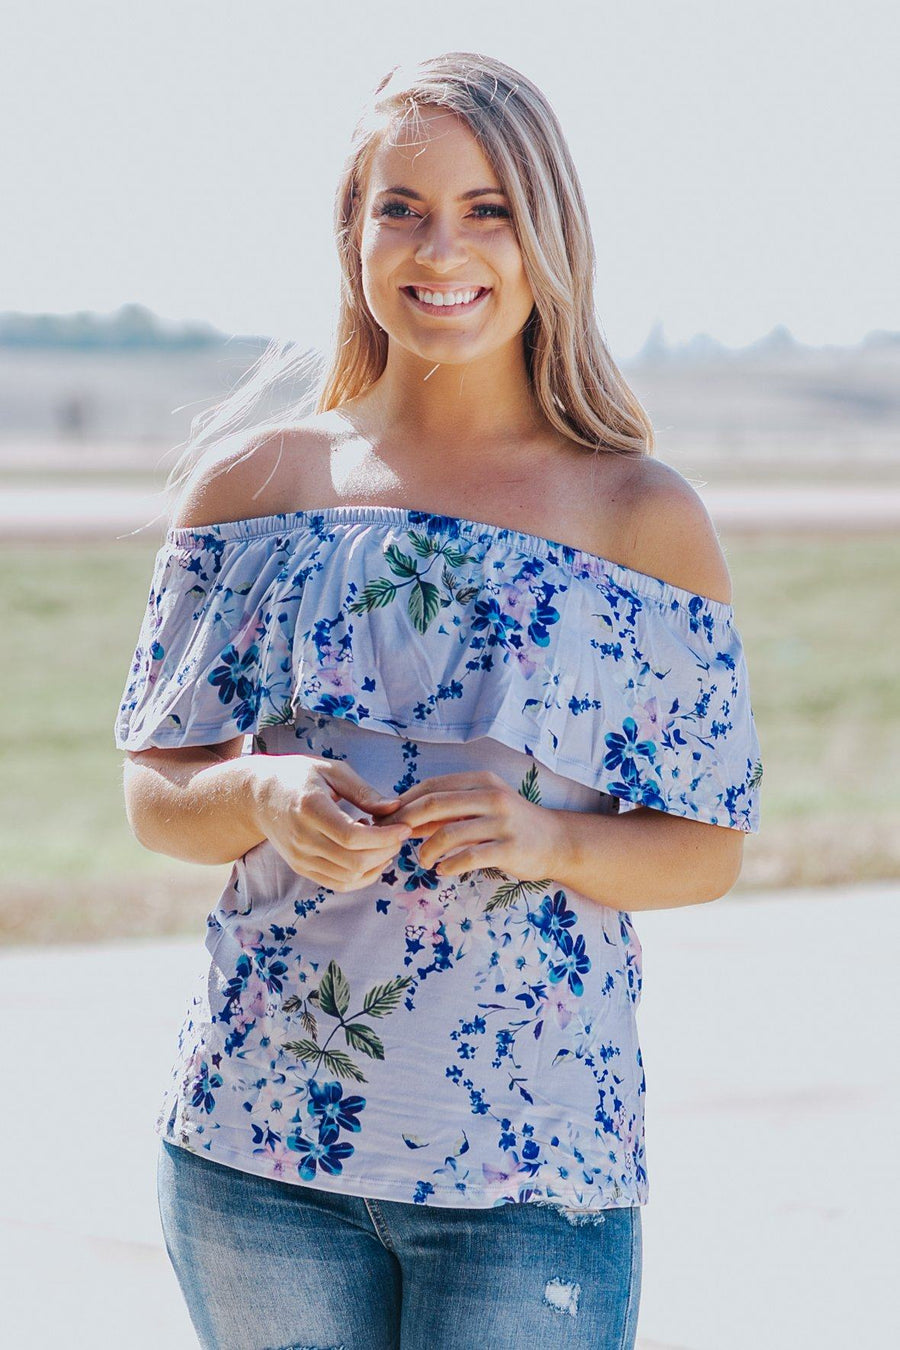 Shop our Floral Tops in several sizes and colors - Filly Flair